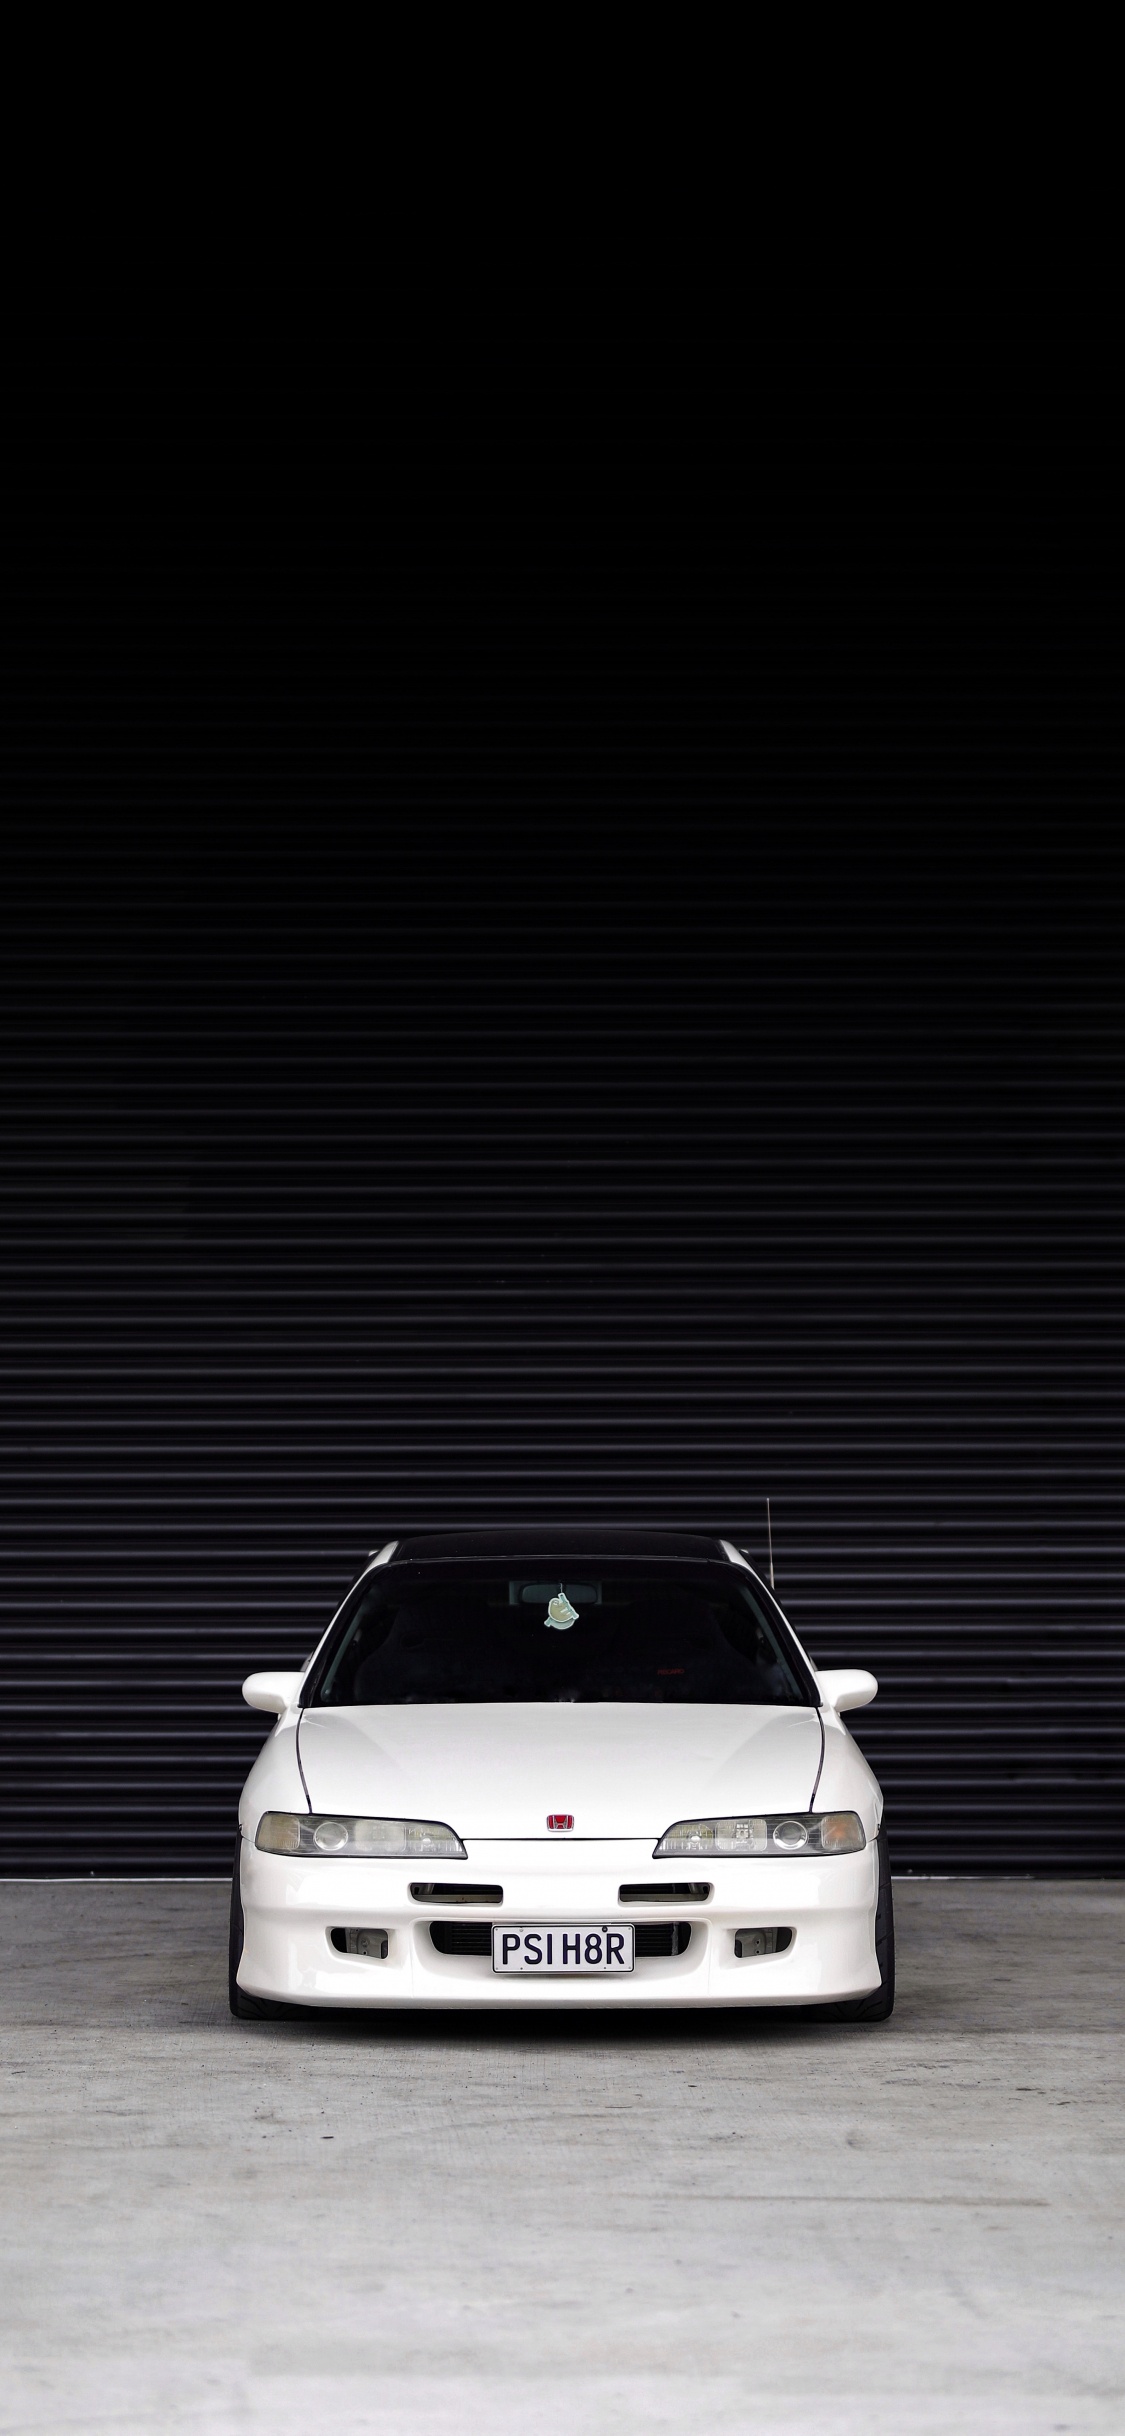 White Car in a White Room. Wallpaper in 1125x2436 Resolution